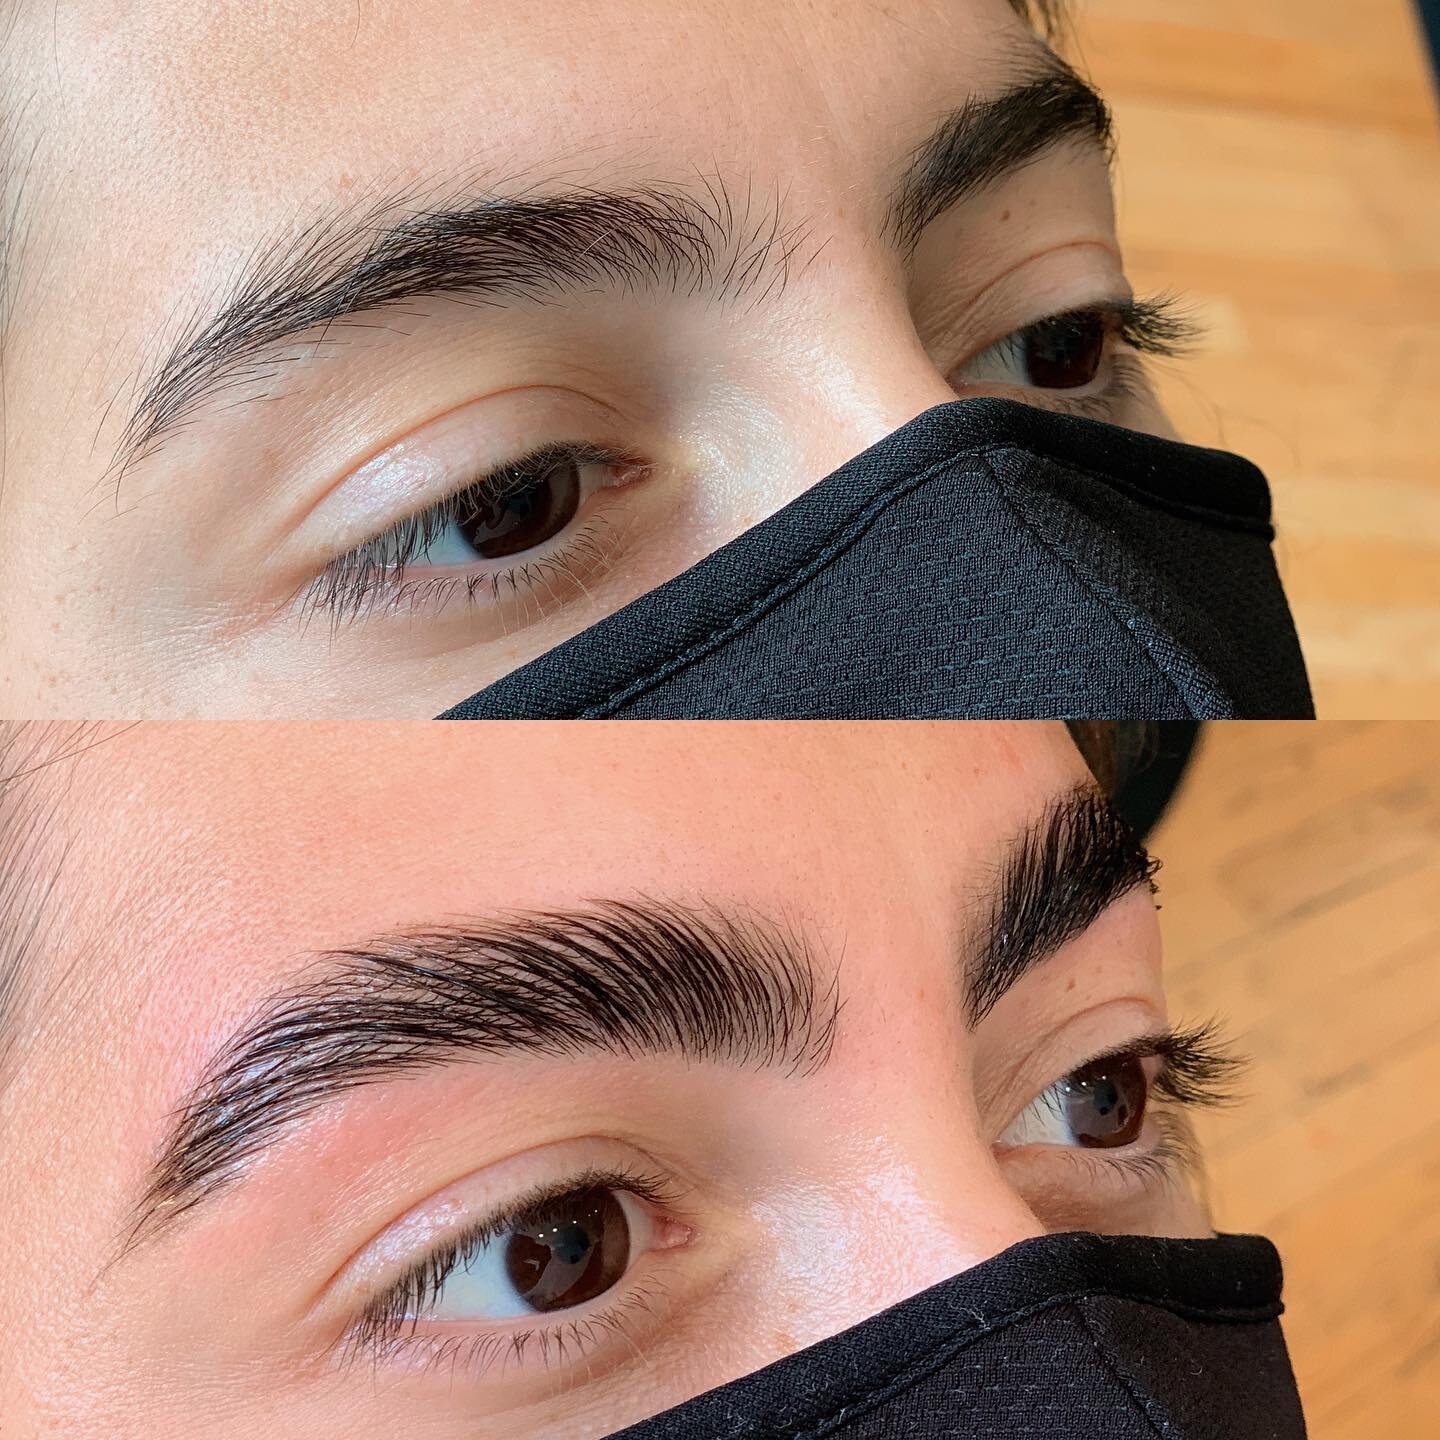 Booking up with laminations and it makes me so happy! Thanks for coming in @catrinsarah ☺️
&bull;
&bull;
What are laminations and are you eligible??
.
Laminations are a light relaxer designed for your eyebrows that lasts up to 8 weeks. 🗓 
.
Tints an